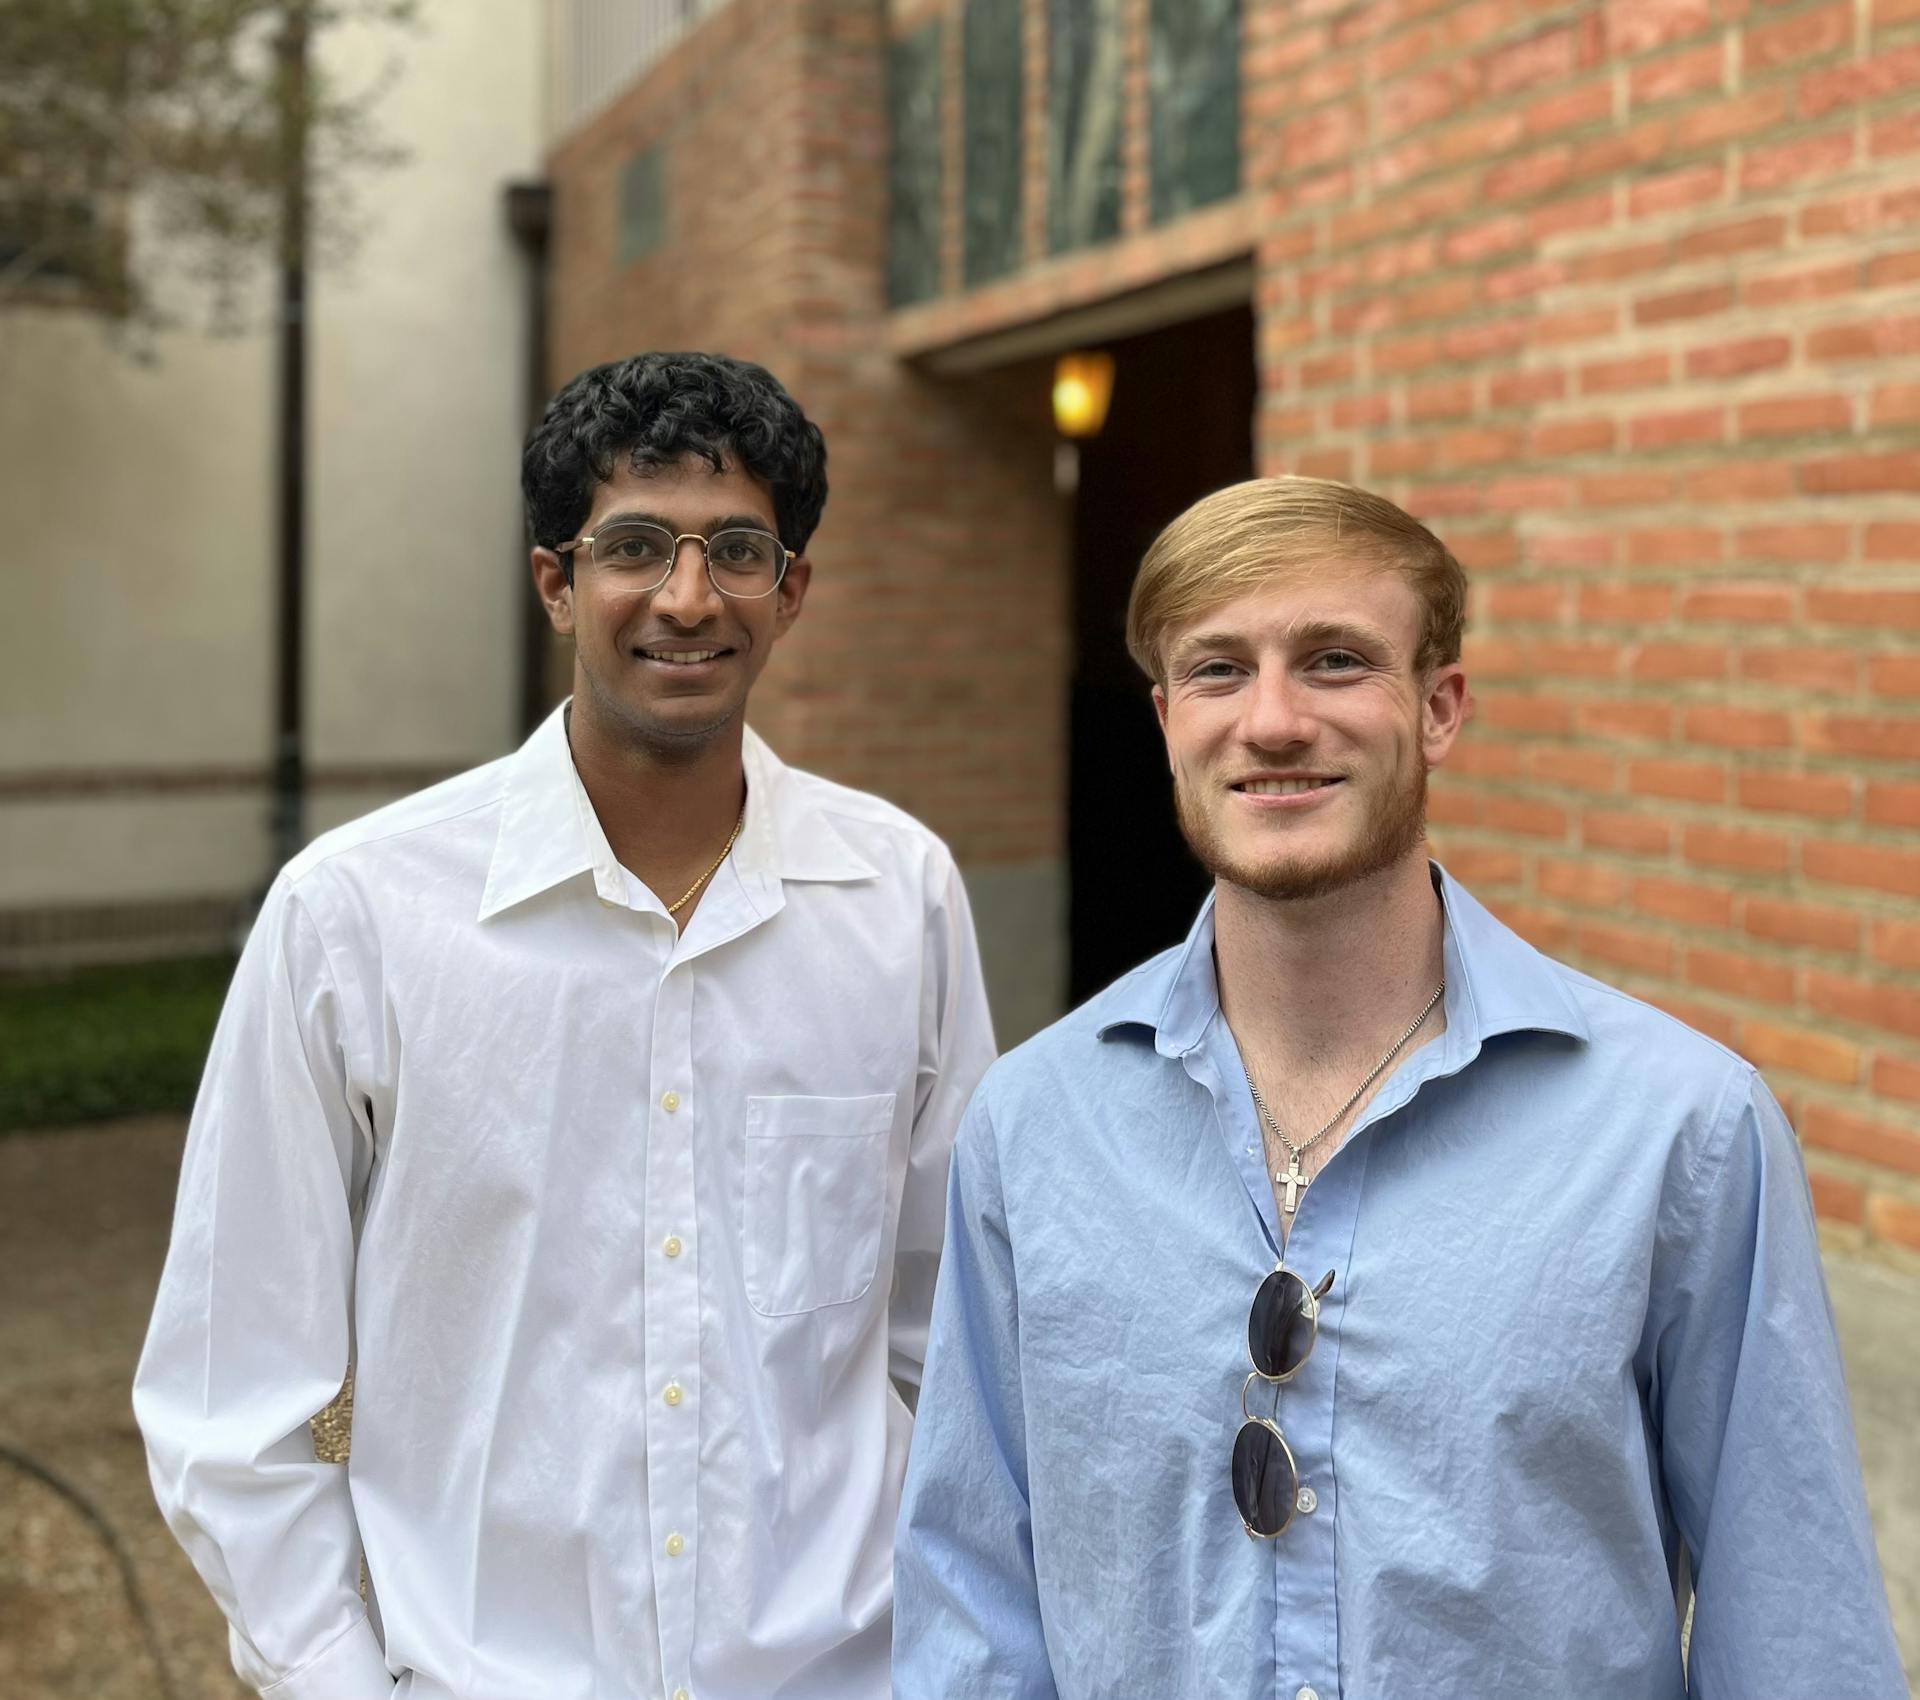 How 2 Rice Students Are Fundraising $3 Million for Rice Venture
Fund